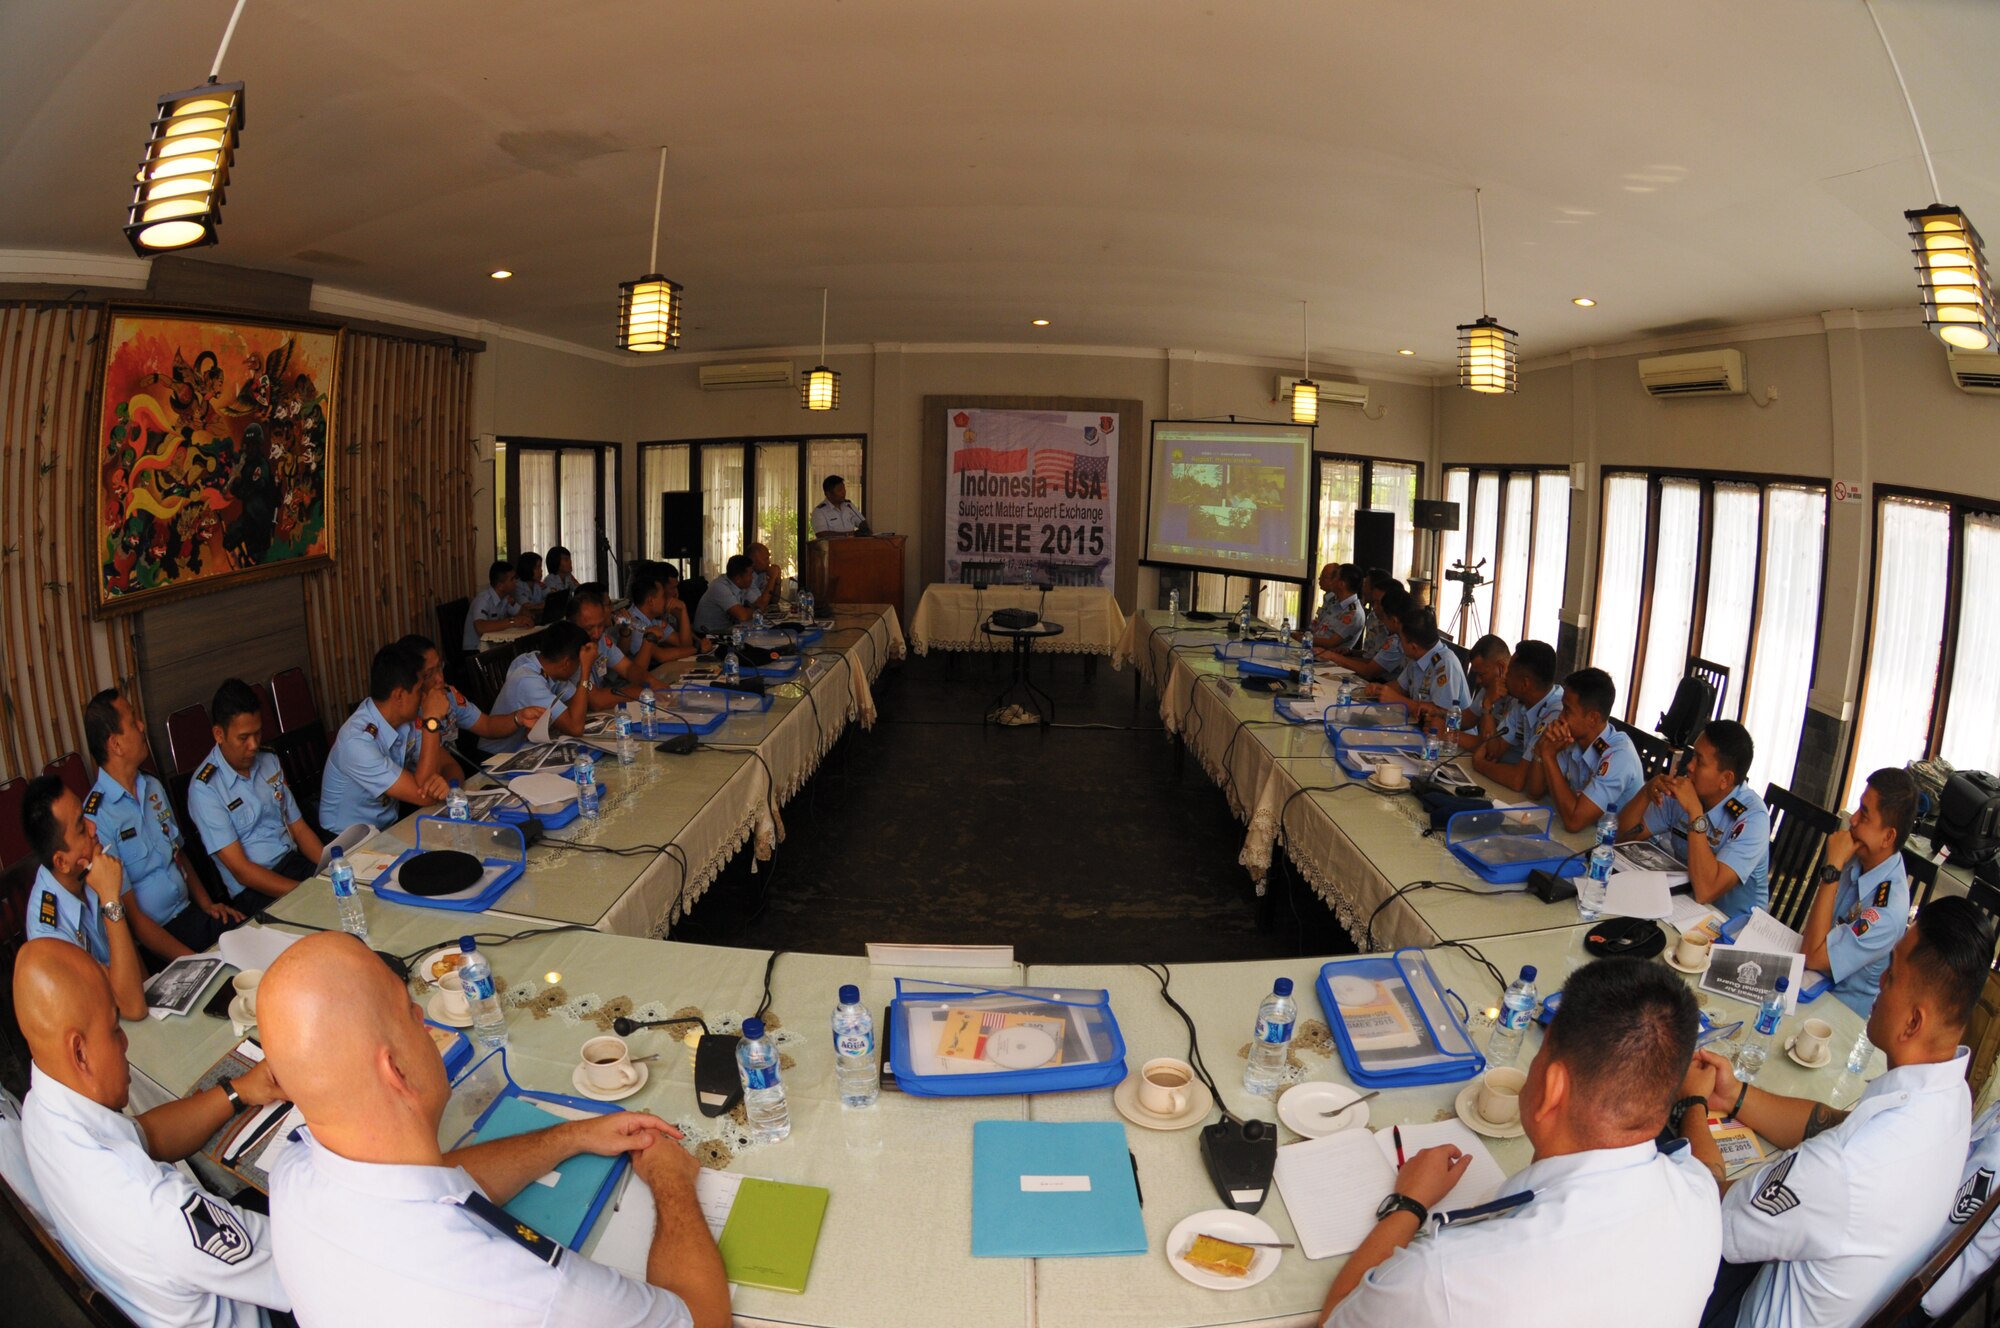 Air defense experts from the Hawaii Air National Guard and the Kohanudnas, the Indonesian armed forces component tasked with air defense, discuss air battle management during an air defense subject matter expert exchange, Sept. 15, 2015, Jakarta, Indonesia. As part of the National Guard's State Partnership Program, members of the HIANG participated in an air defense subject matter expert exchange with counterparts from Indonesia. (U.S. Air National Guard photo by Senior Airman Orlando Corpuz/released)
